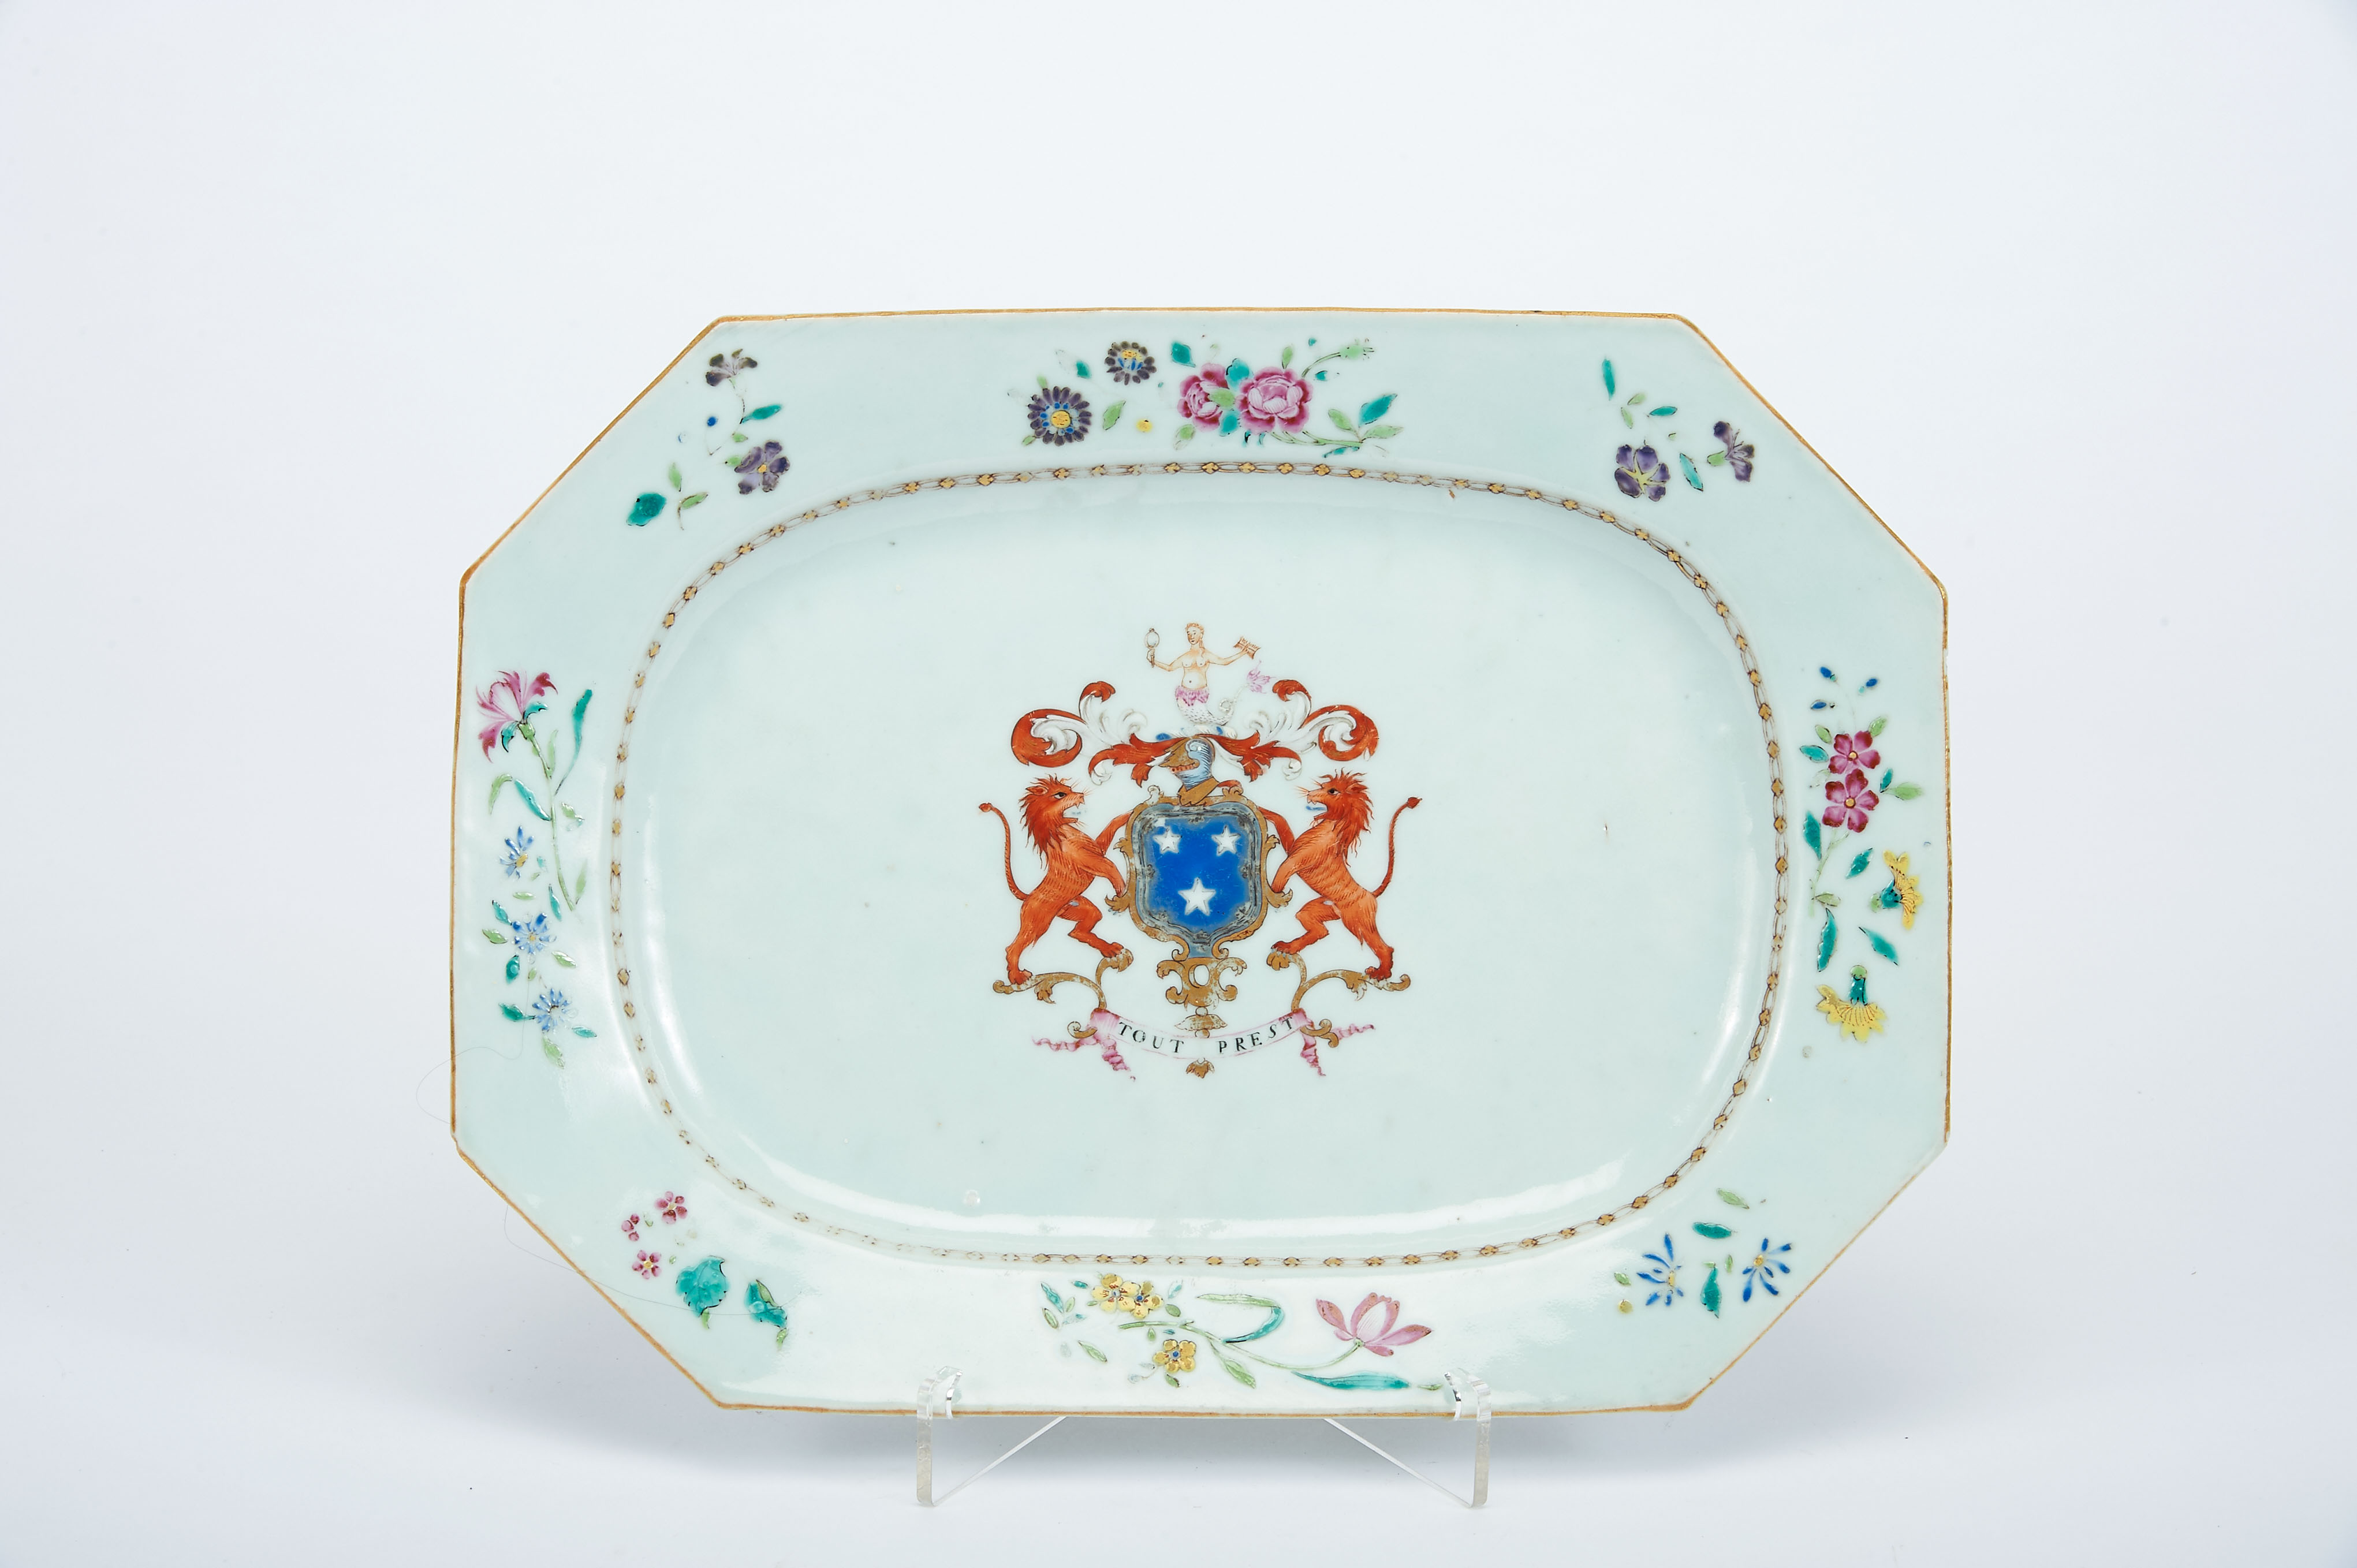 An Octagonal Platter, Chinese export porcelain, polycrome and gilt decoration with the coat of